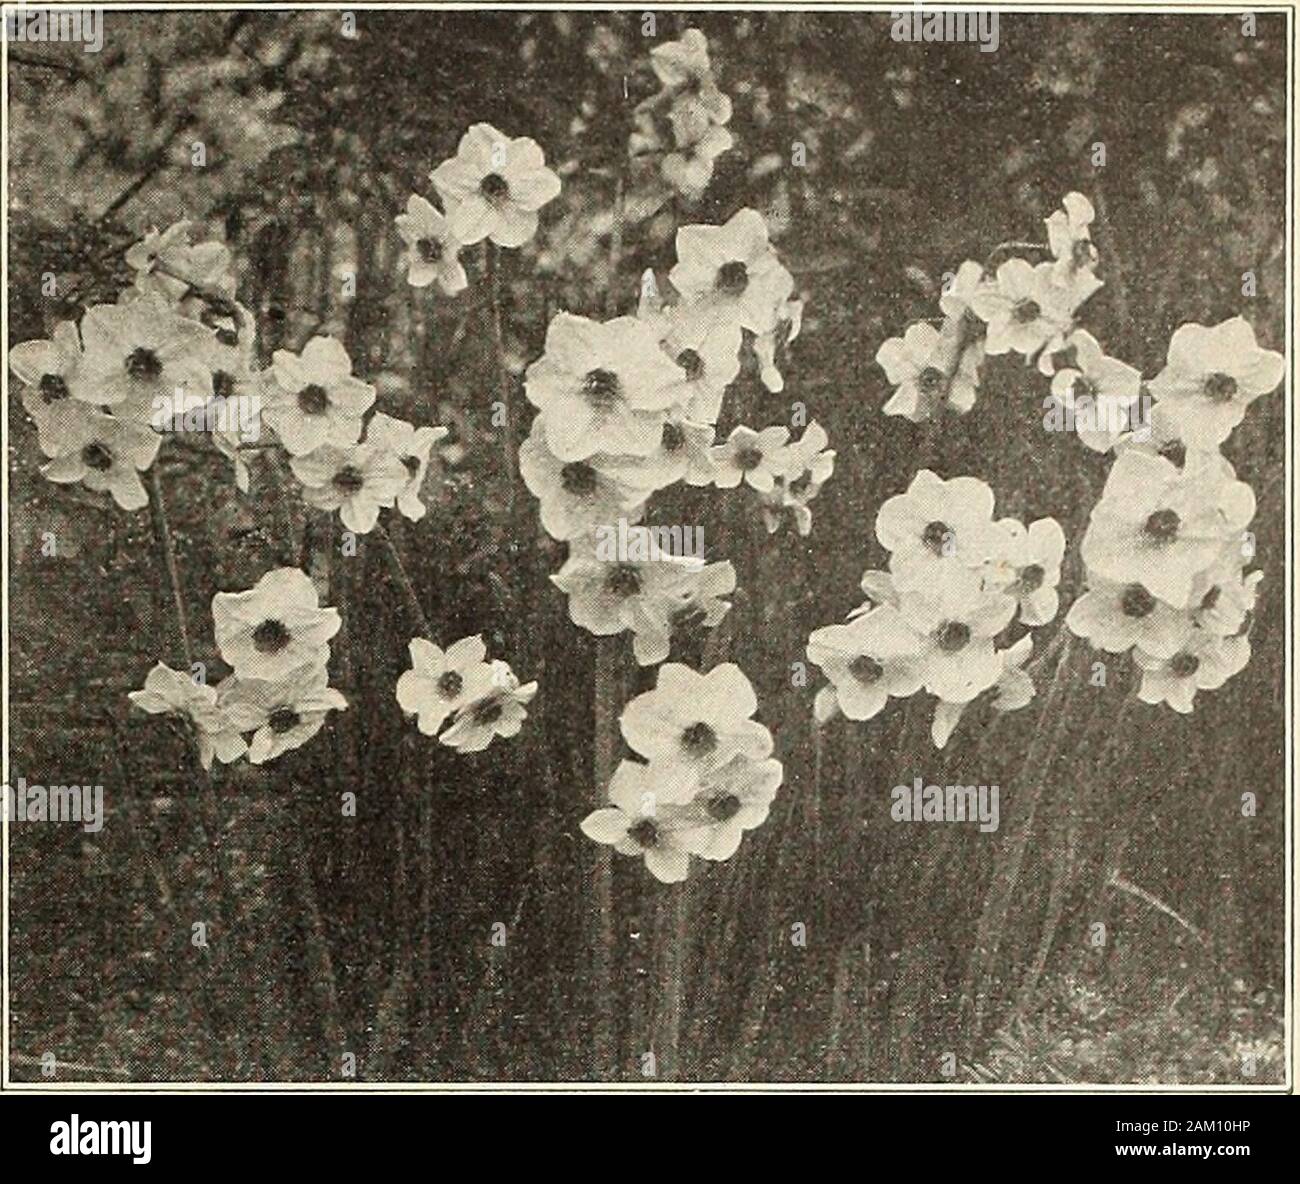 Currie's bulbs and plants : autumn 1915 . w Daffodils, used extensively for forcing as well as forbedding outdoors. Does best north of Central Wisconsin if givensome winter protection. Each Doz..04 $ .35 05 .03 .45 .25 100$2.50 3.00 1.75 1000$18.50 26.00 13.50 03 .30 2.00 16.50 04 .35 2.25 18.00 03 .30 1.75 14.00 Extra selected largebulbs $ Mammoth double nosed bulbs producing two or more flowers Alba Plena Odorata — Pure white,sweet scented, resembles a Gardenia.Blooms best in a cool, moist situationIncomparable (Butter and Eggs)—Sul-phur yellow, sweet scented Orange Phoenix—White and orange Stock Photo